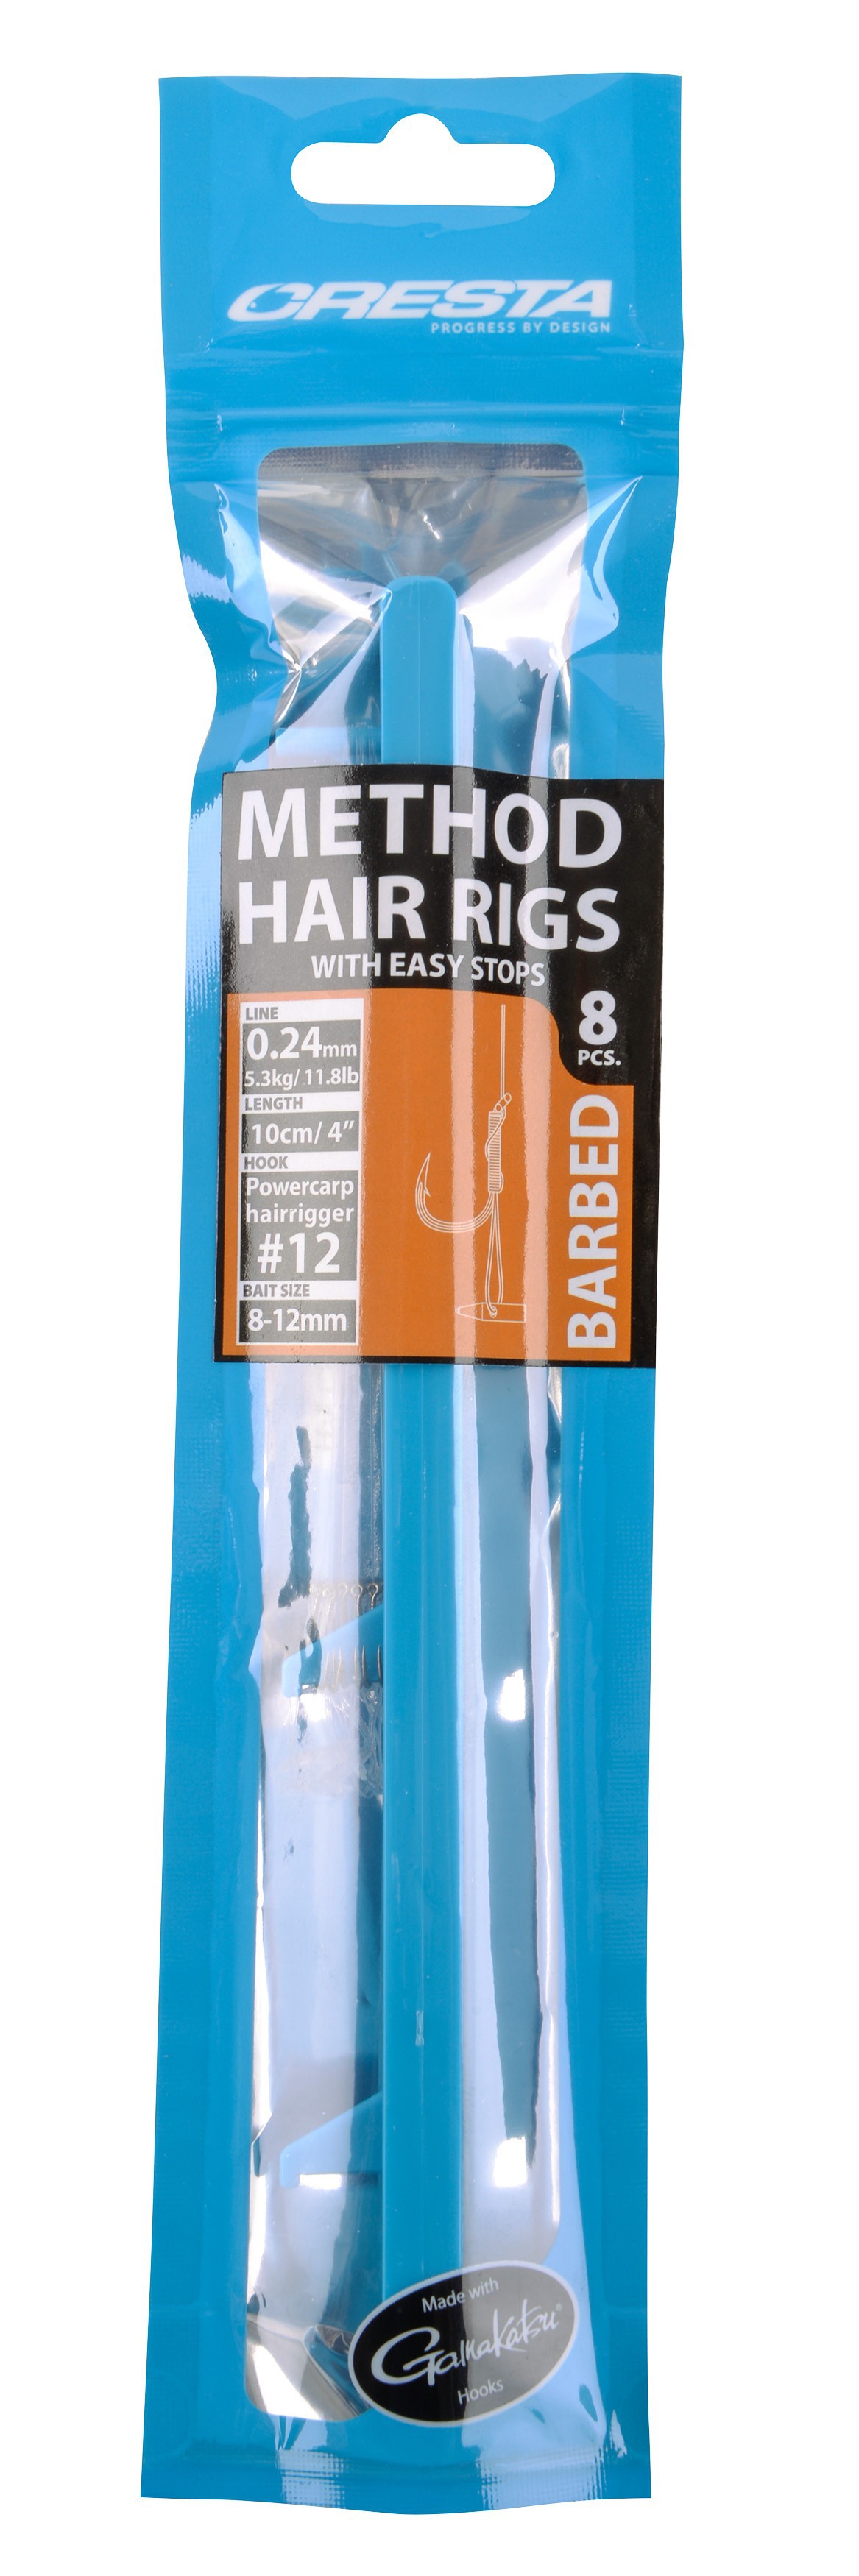 Spro - Cresta Method Hair Rigs With Easy Stops Barbed 4" – 10 cm Size 14